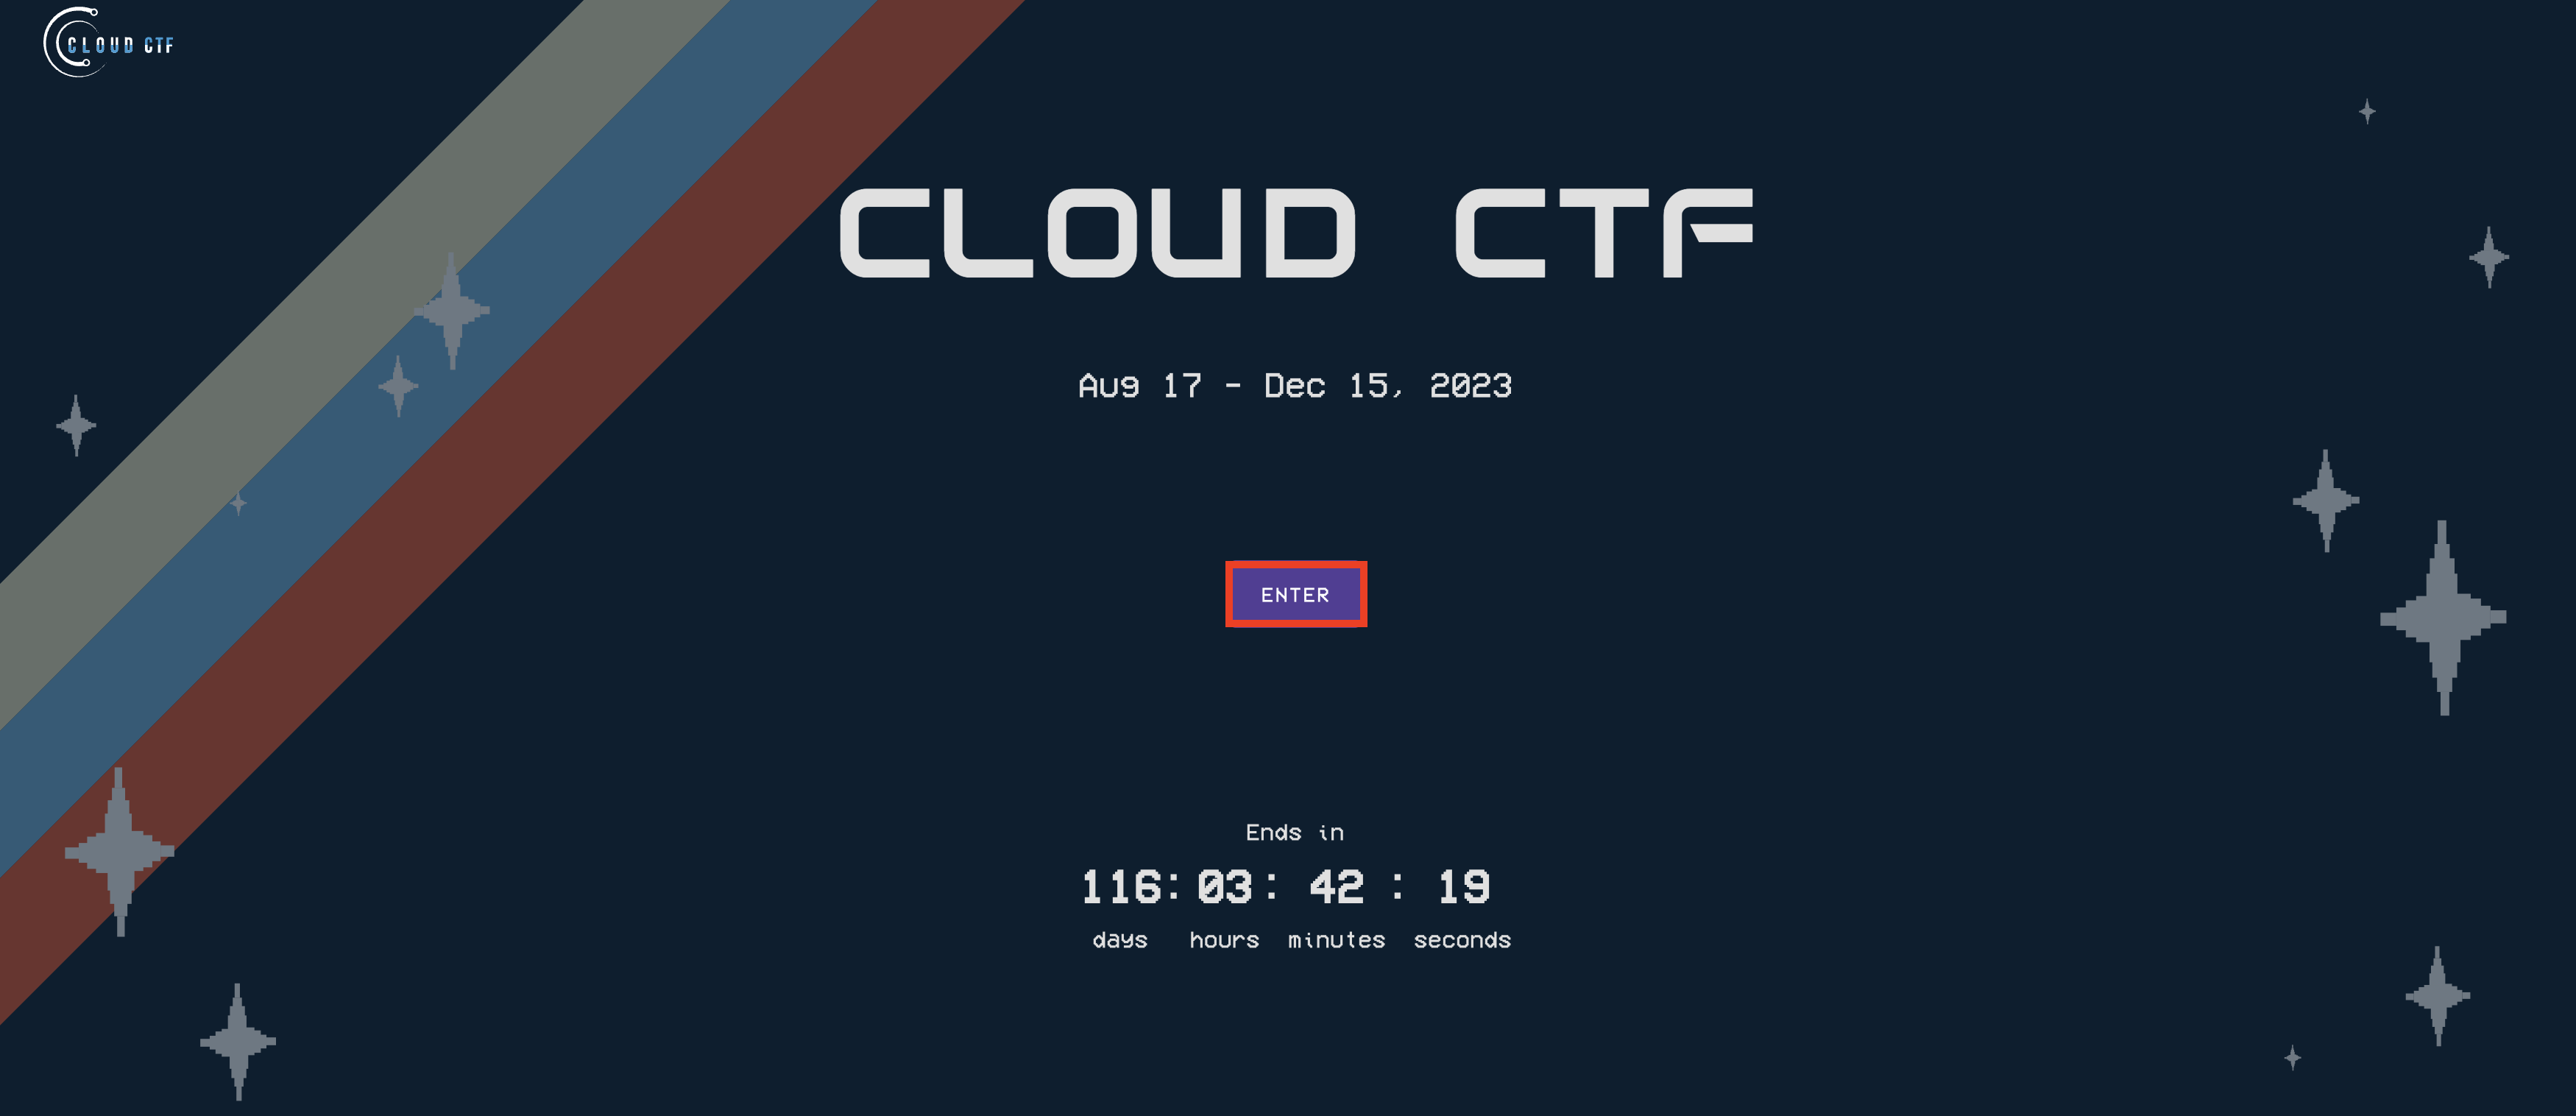 Here, underneath the dates of your Cloud CTF, in the middle of the screen, you can click the enter button to join a team and begin the competition.